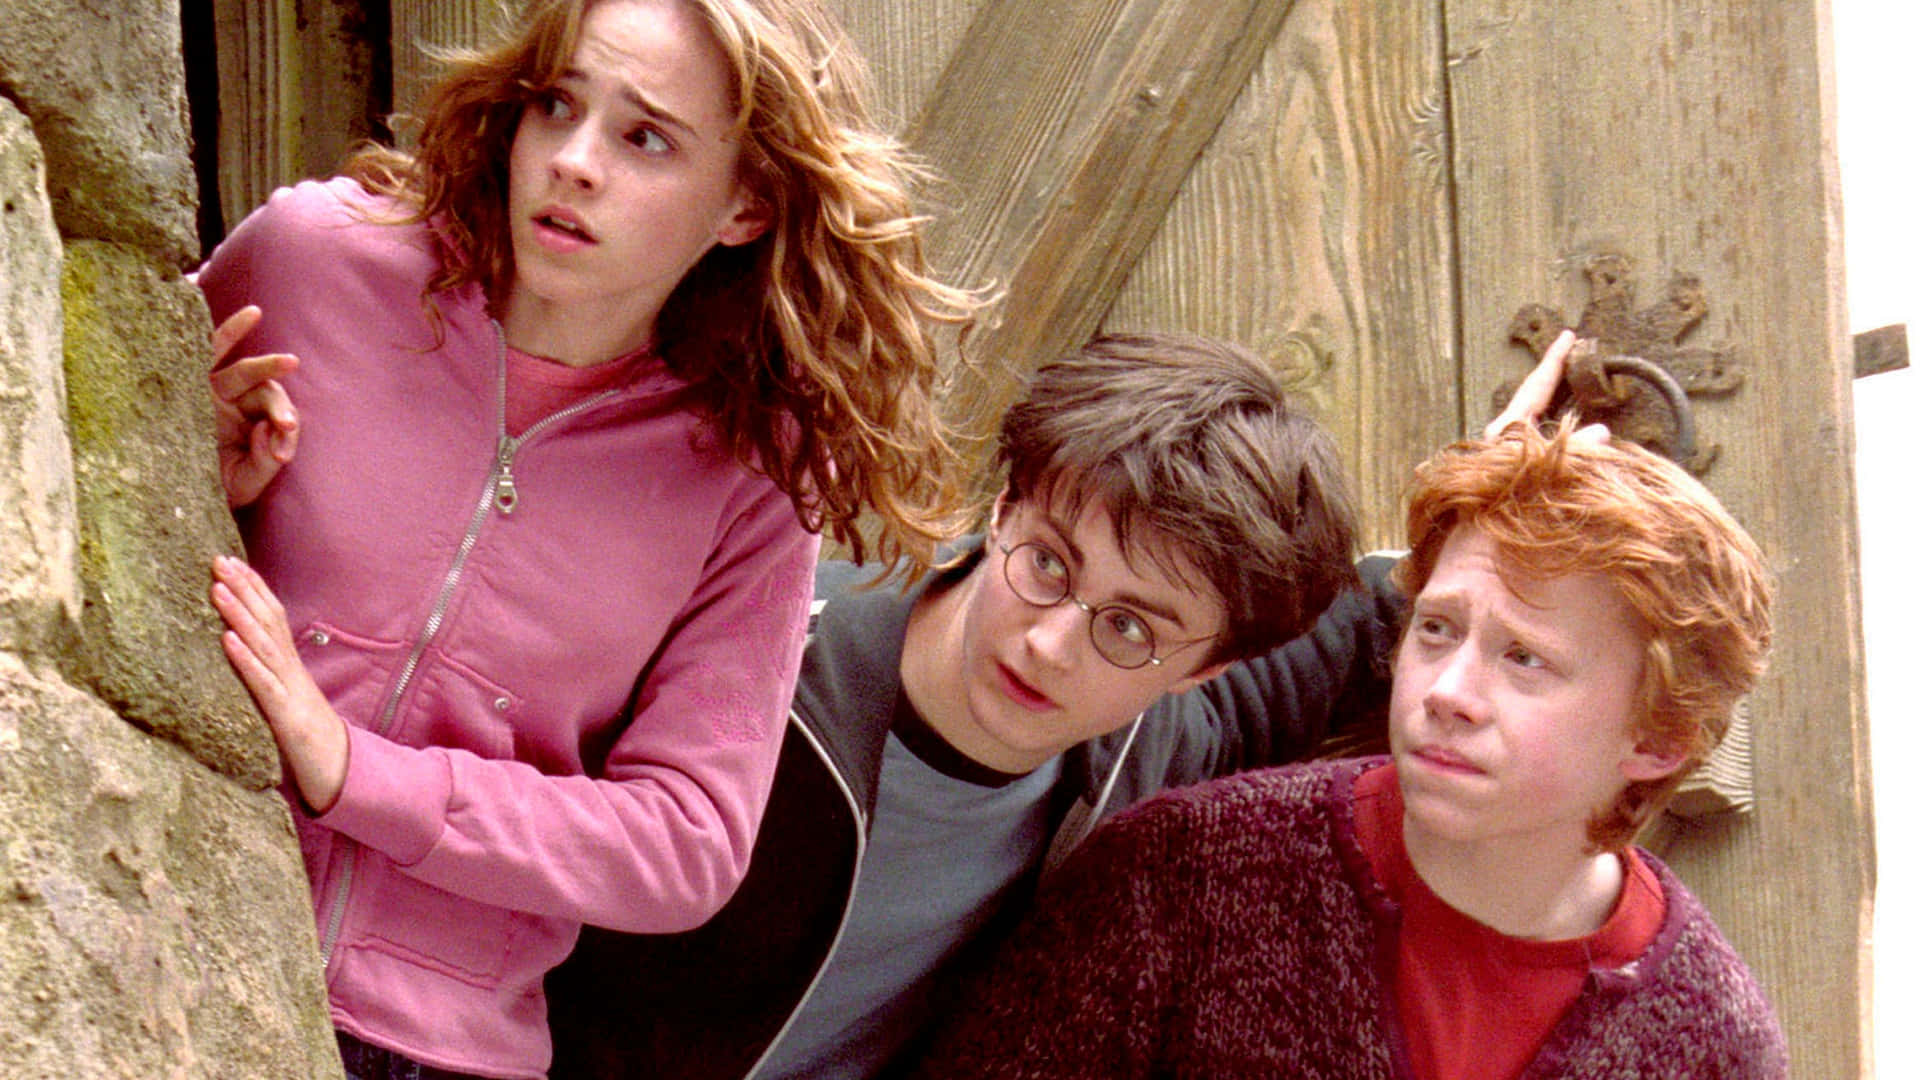 Harry Potter and his friends take a break from Hogwarts in “The Prisoner of Azkaban” Wallpaper